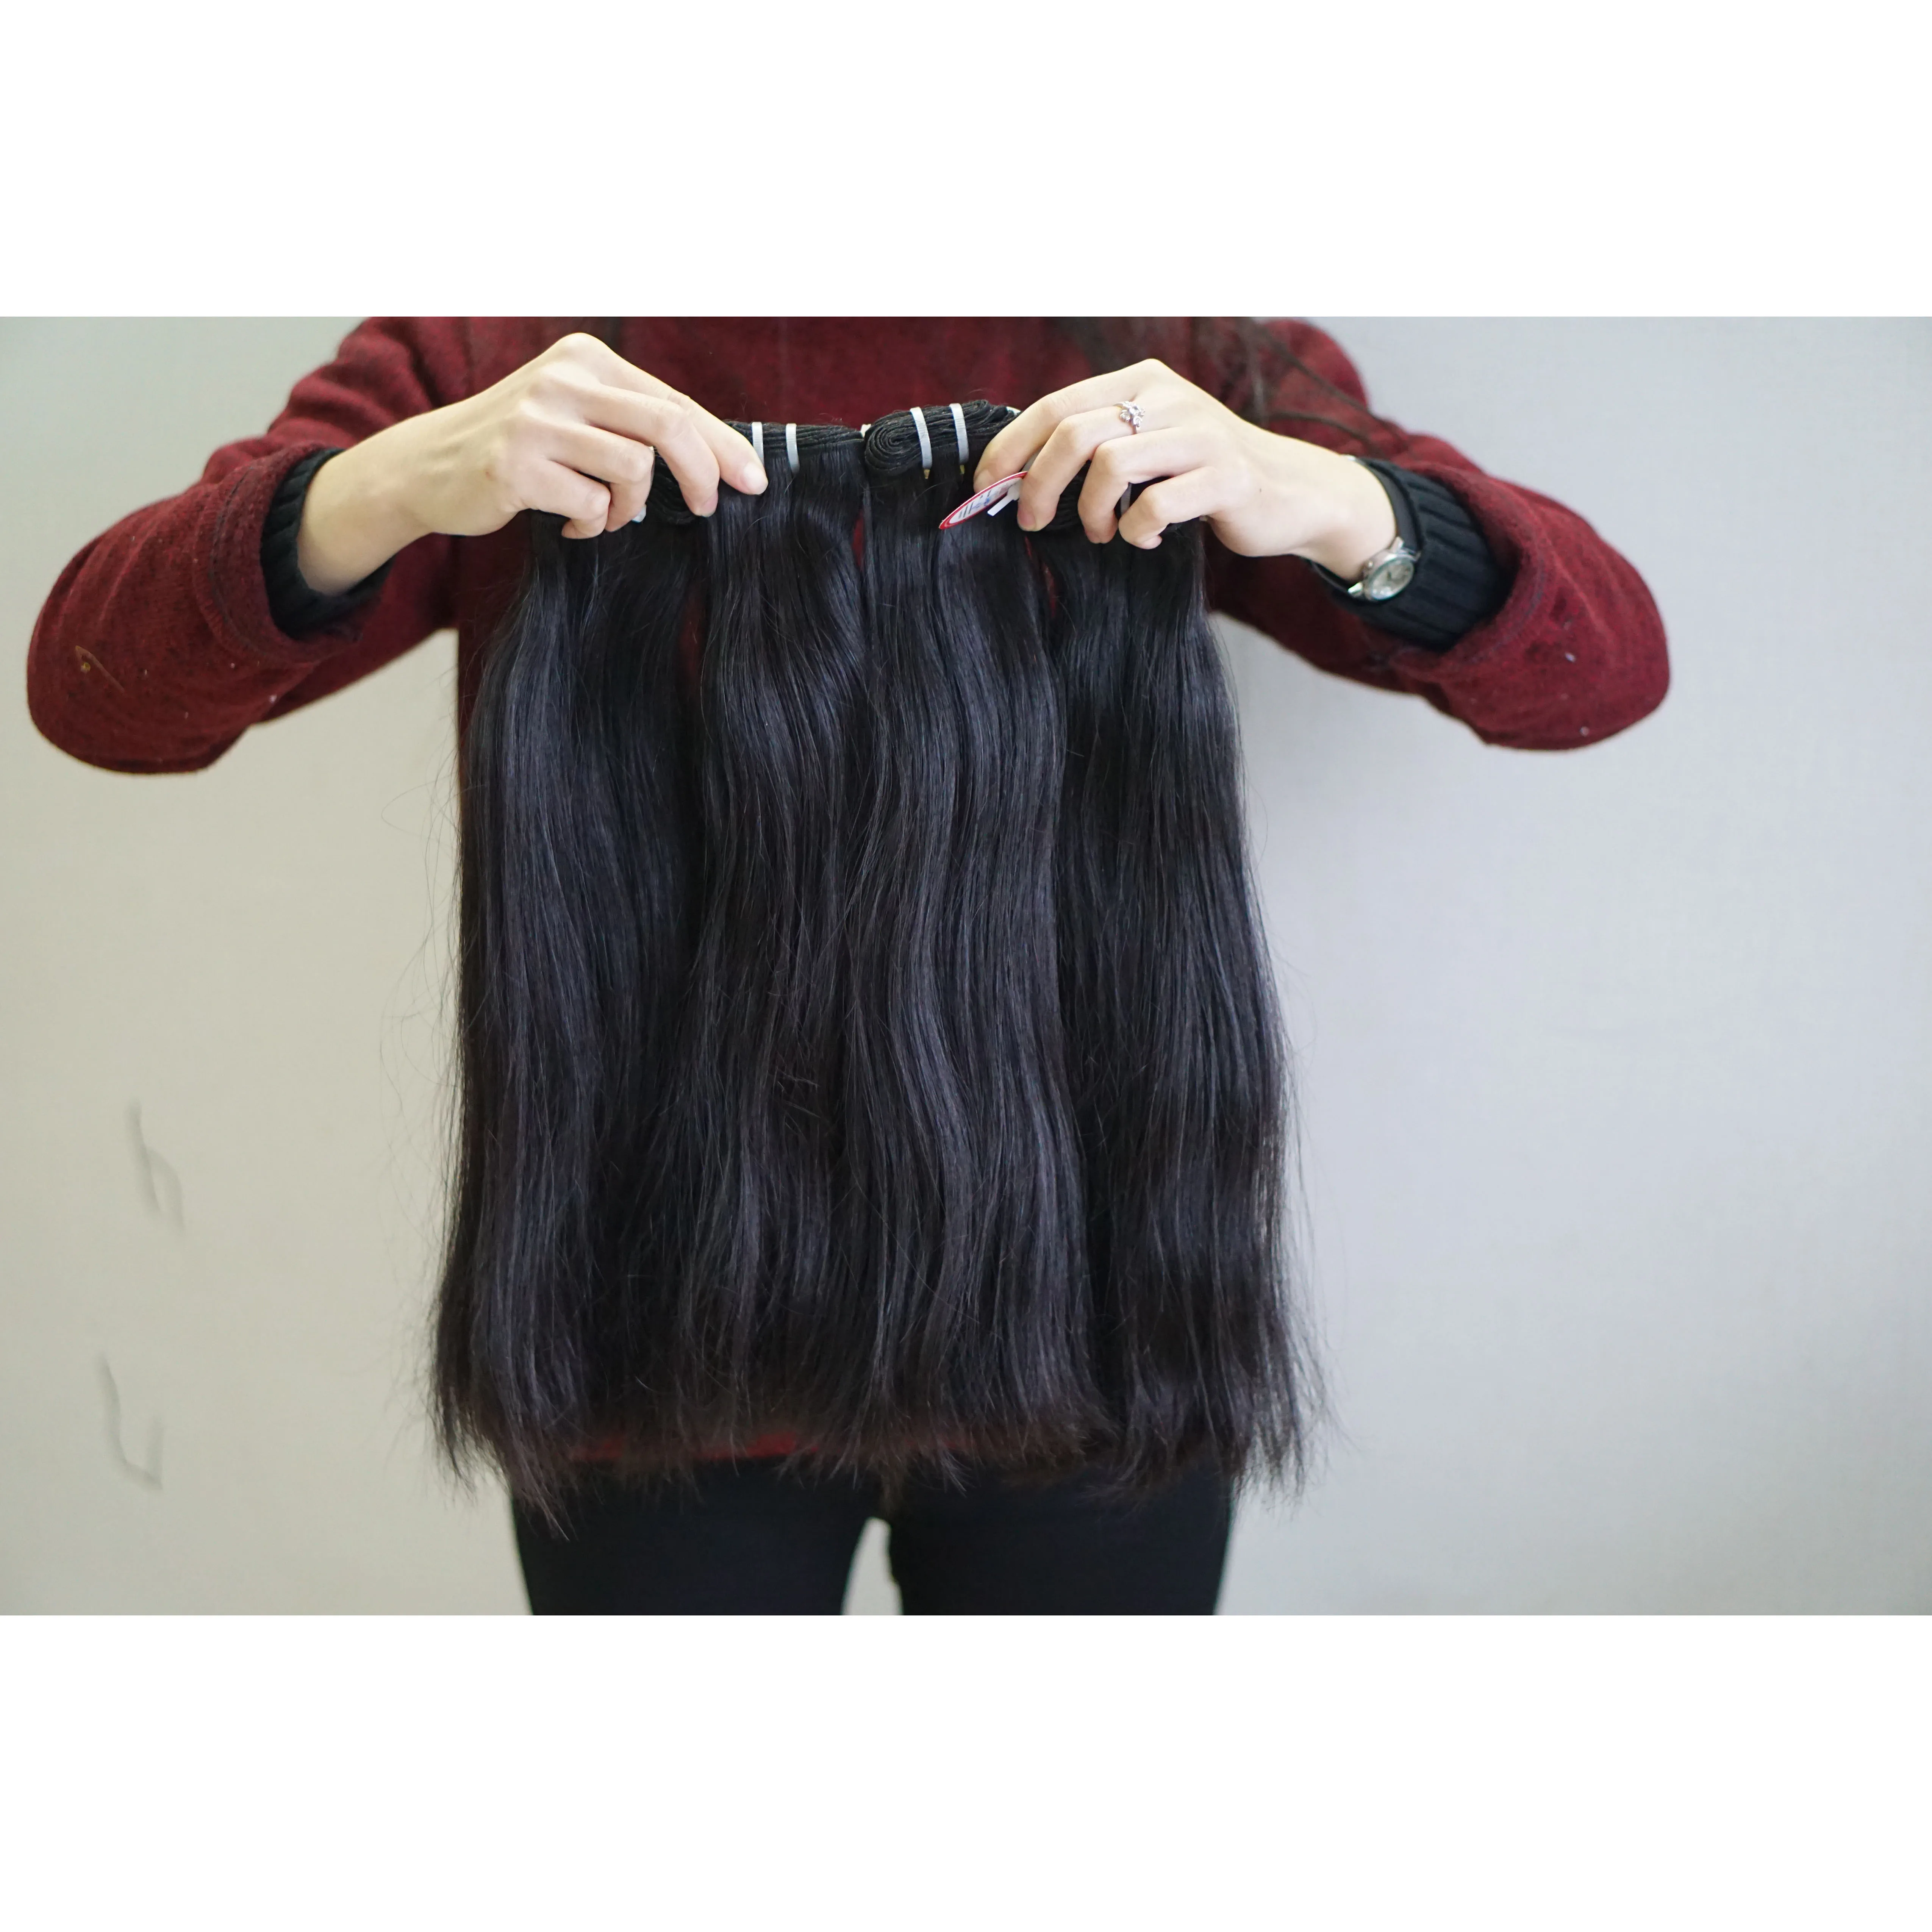 hair non chemical processing and natural silky straight hair